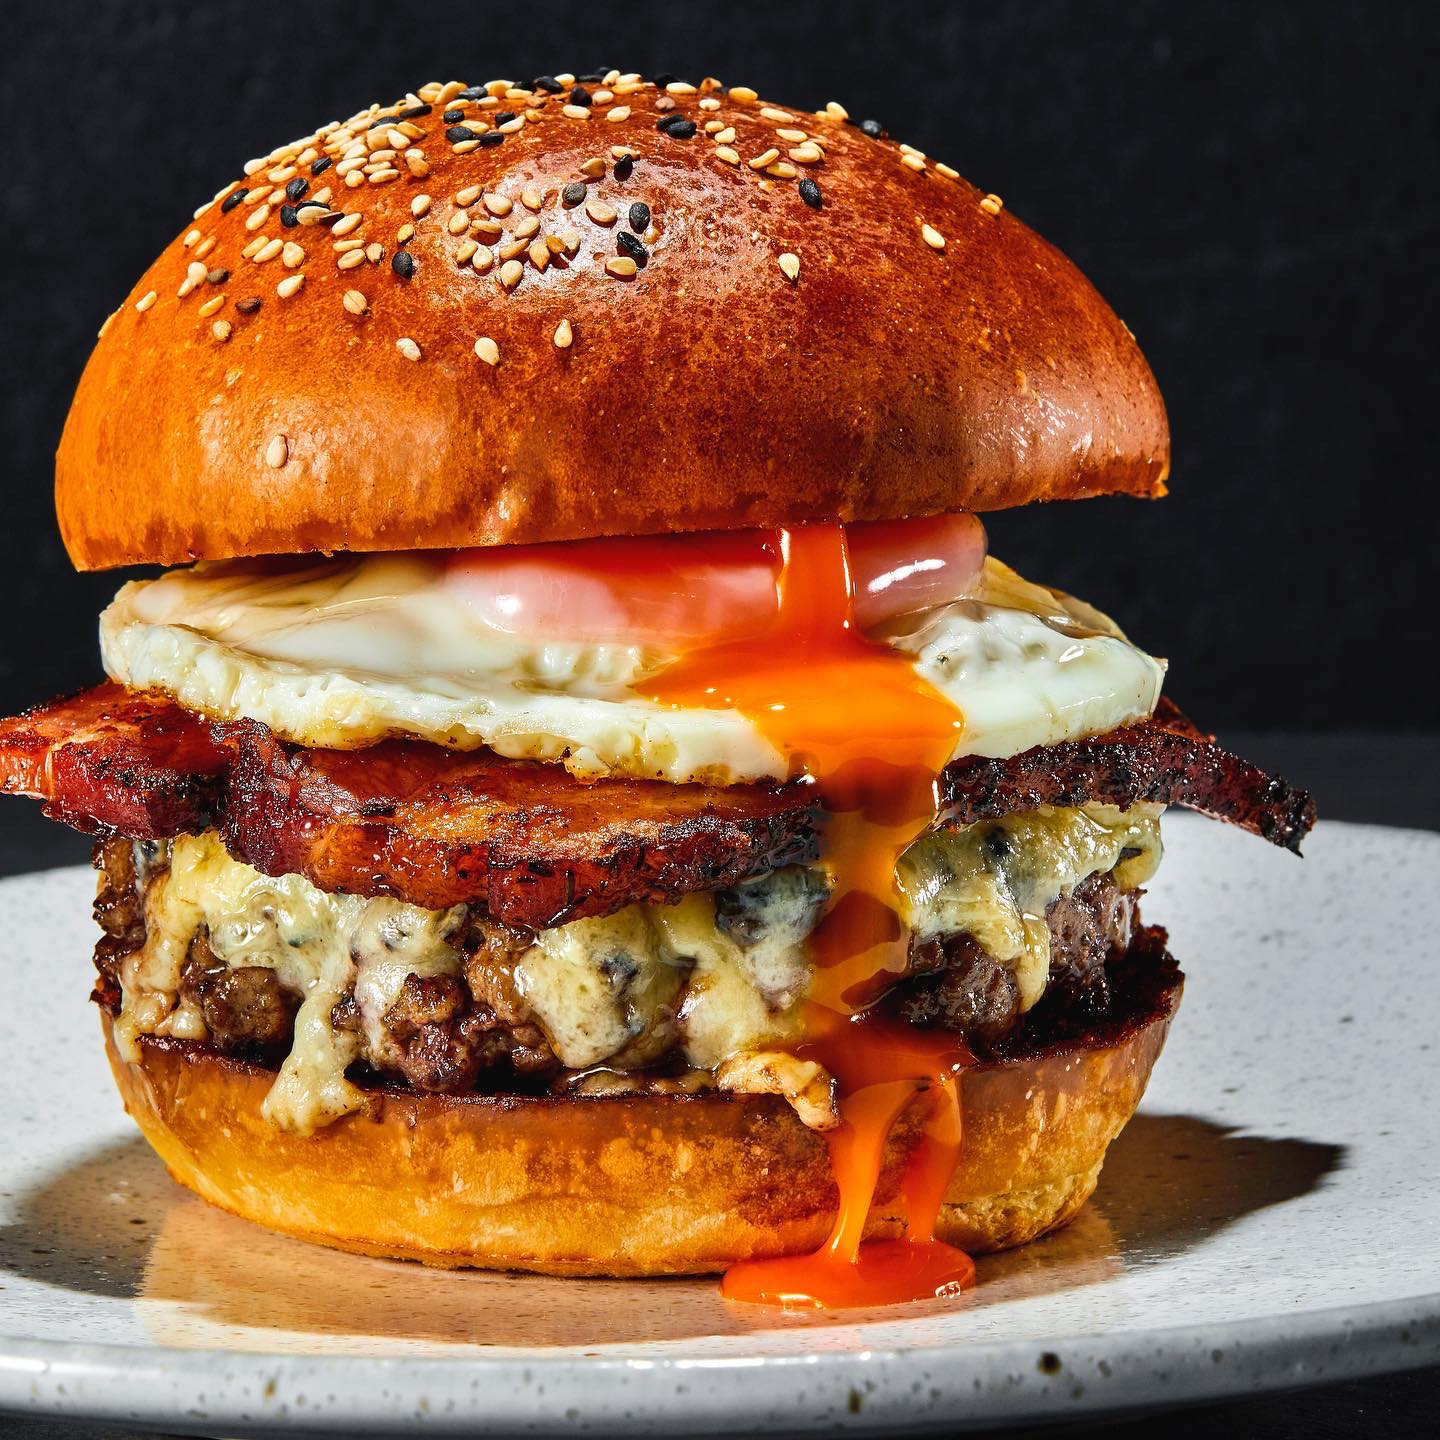 Gordon Ramsay's new burger recipe is freaking people out